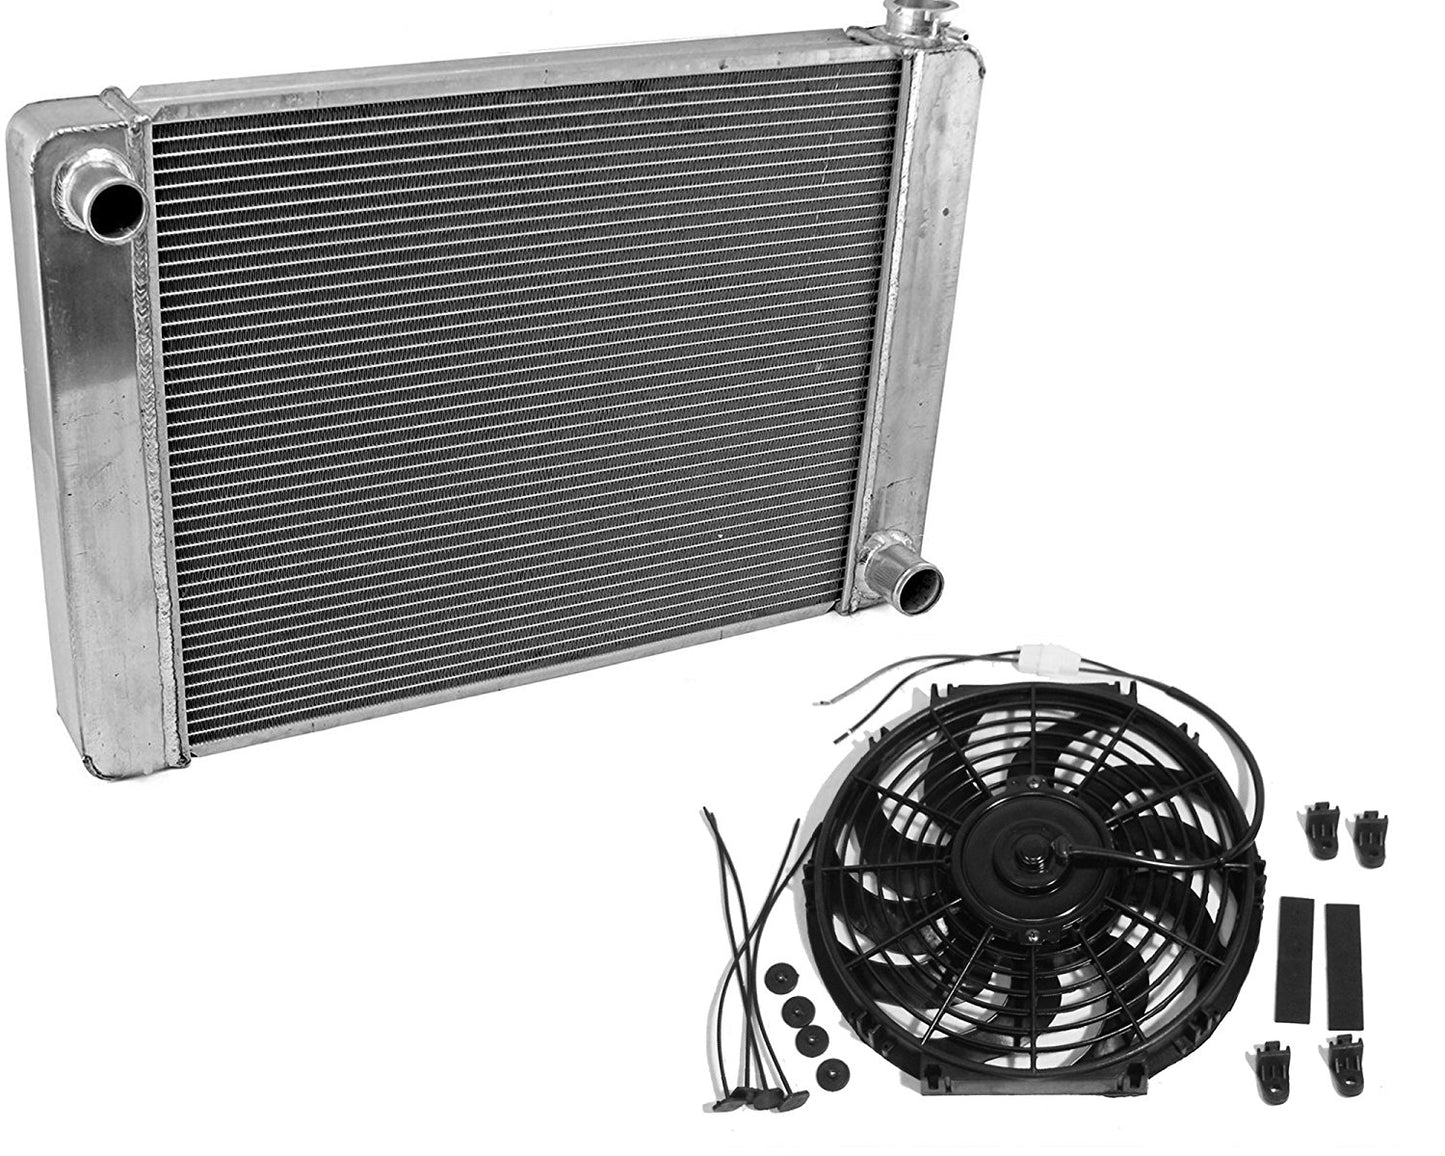 Fabricated Aluminum Radiator 31" x 19" x3" Overall For SBC BBC Chevy GM & 12" Electric Curved Blade Reversible Cooling Fan